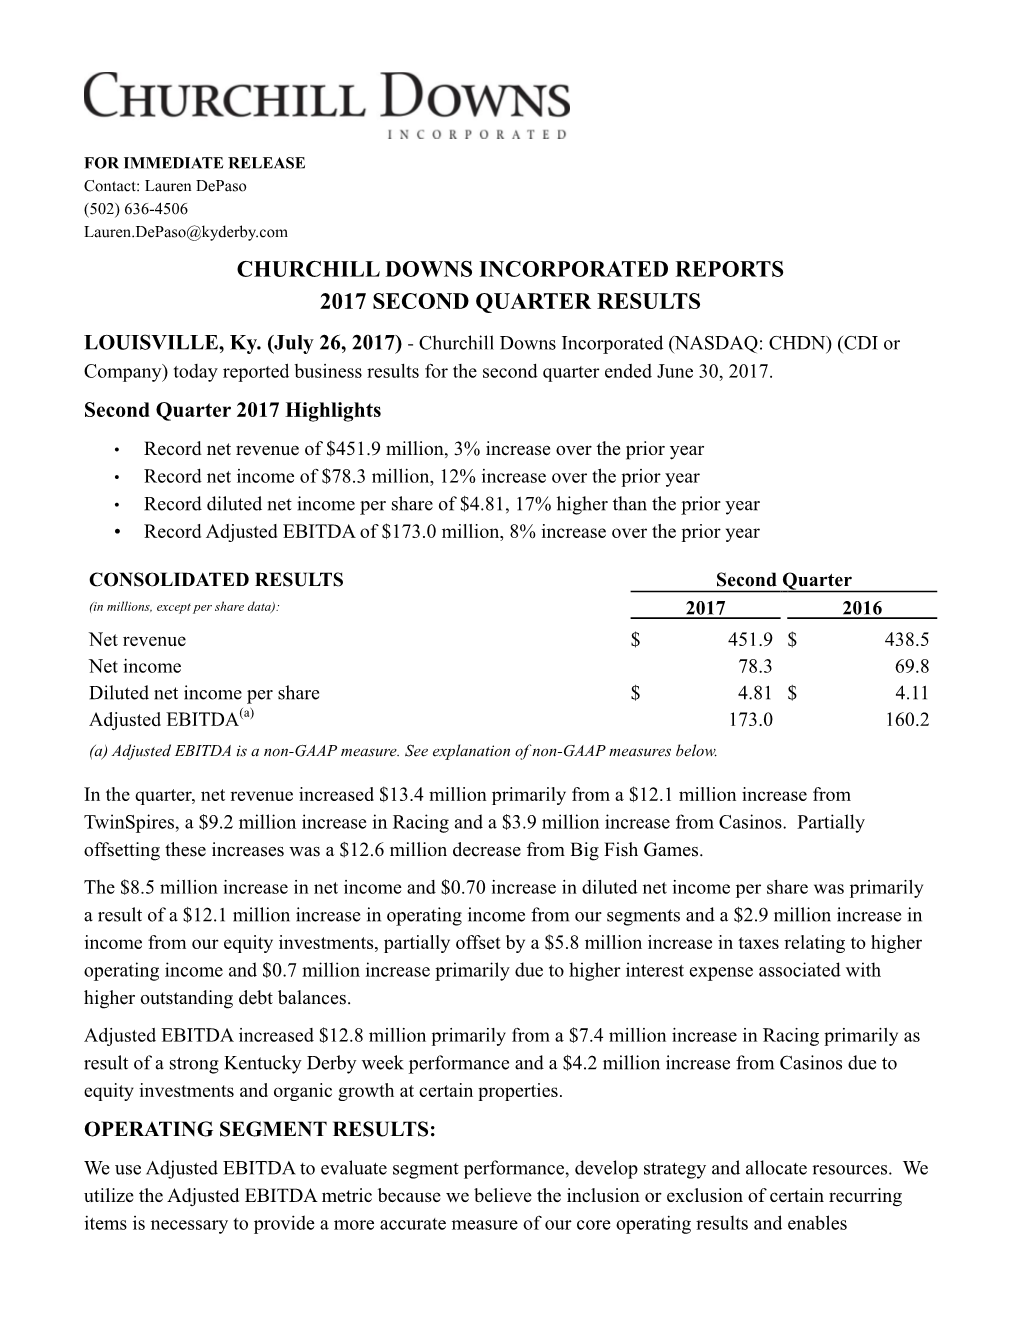 CHURCHILL DOWNS INCORPORATED REPORTS 2017 SECOND QUARTER RESULTS LOUISVILLE, Ky